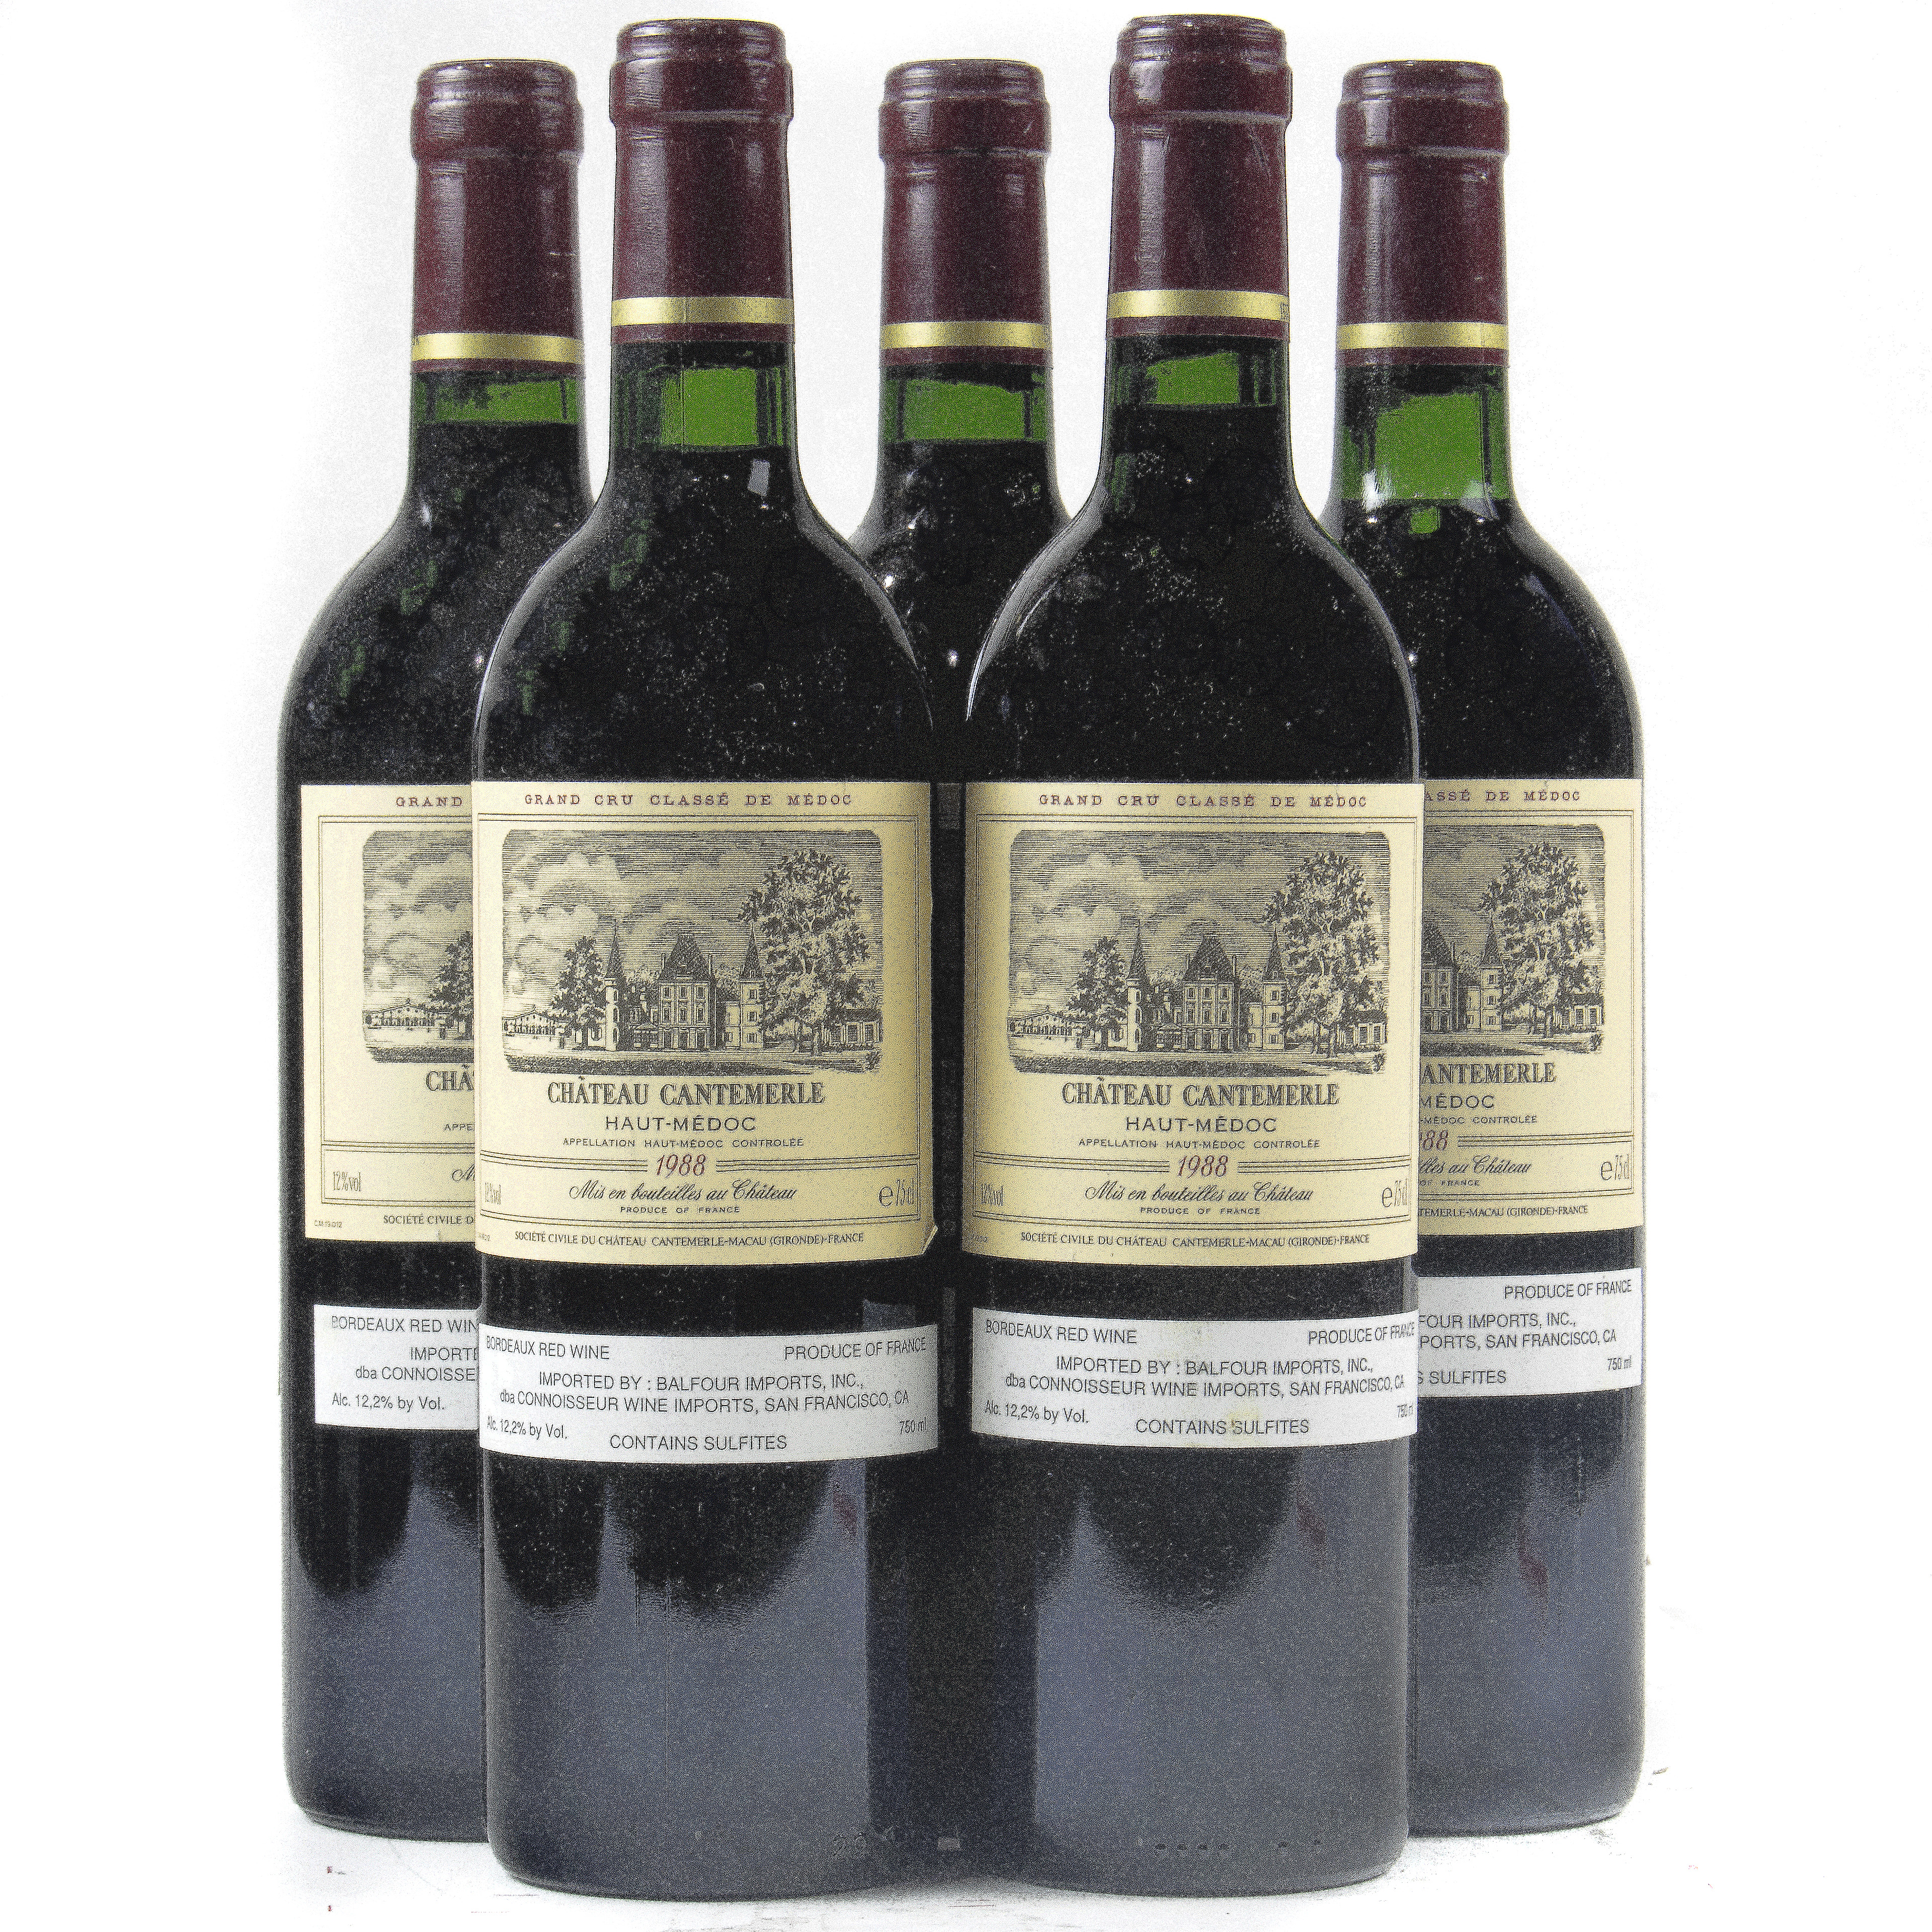 (LOT OF 5) A GROUP OF CHATEAU CANTEMERLE